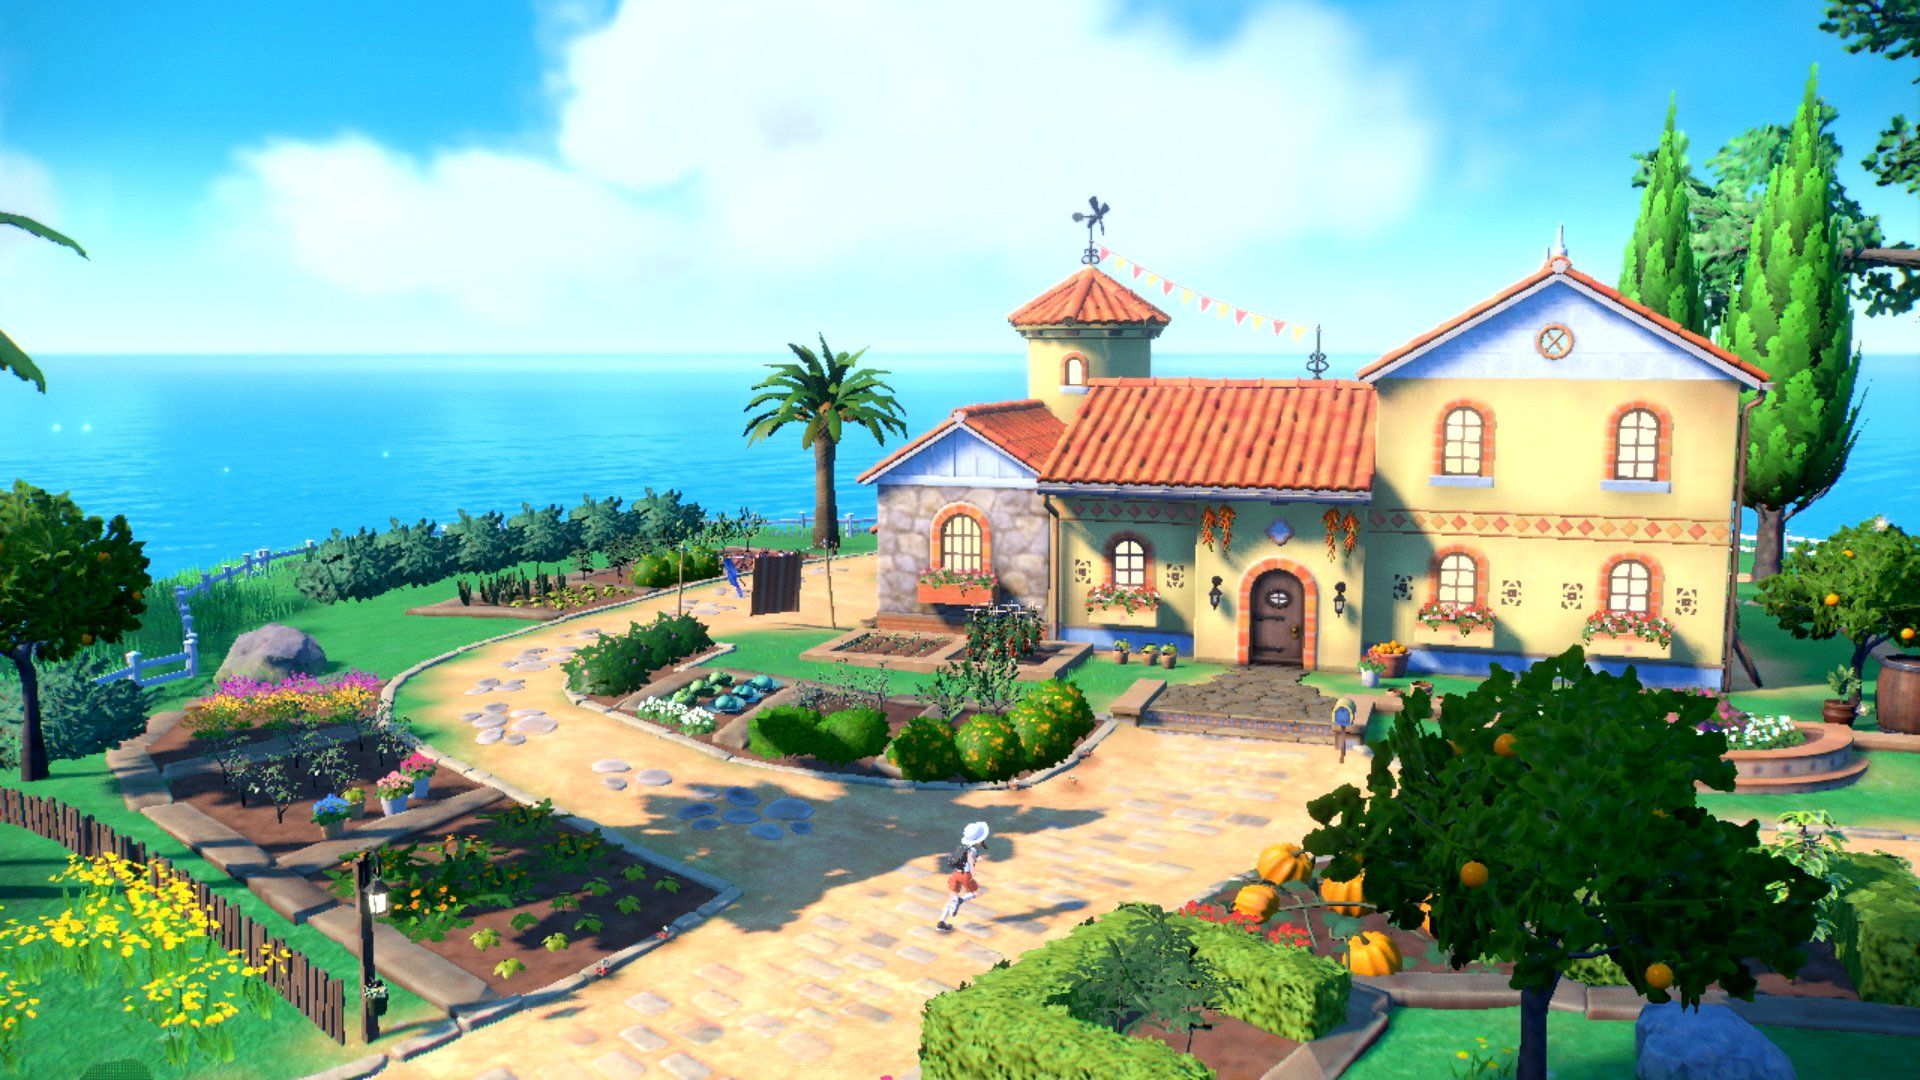 A screenshot of Pokemon Scralet & Violet showing the main character running toward a seaside building